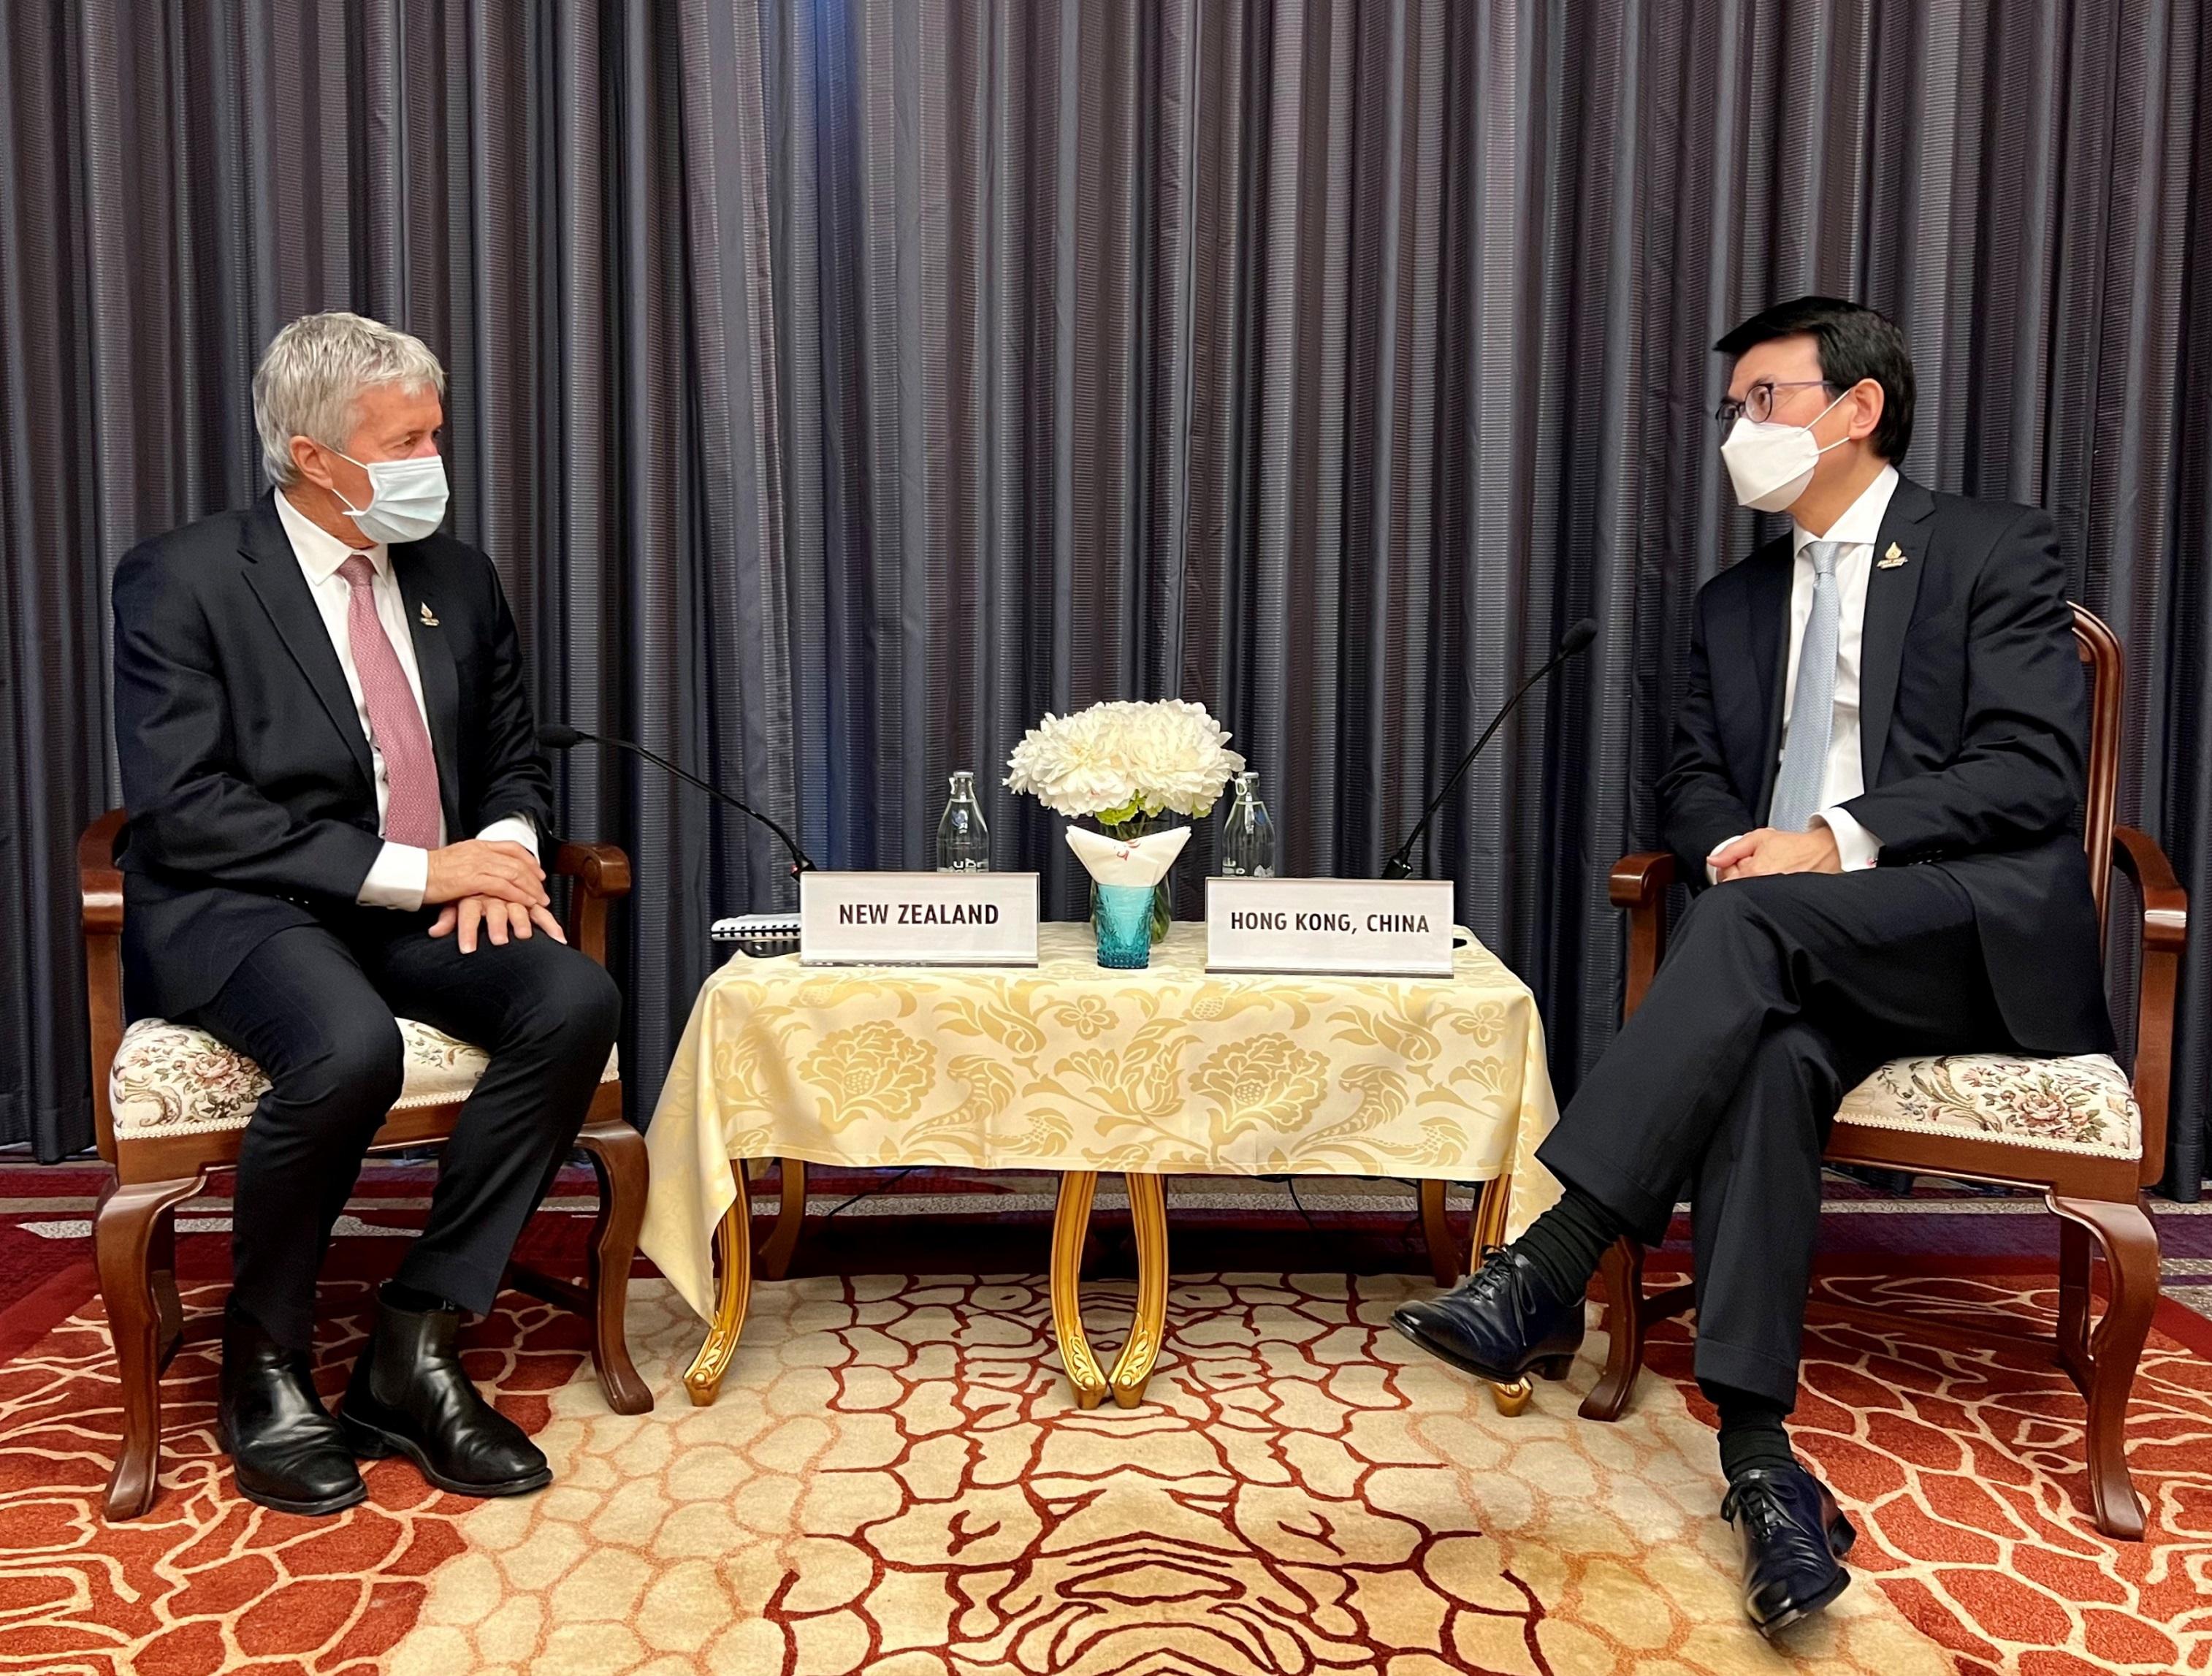 The Secretary for Commerce and Economic Development, Mr Edward Yau (right), held a bilateral meeting with the Minister for Trade and Export Growth of New Zealand, Hon Damien O'Connor, to exchange views on issues of mutual concerns, on the sidelines of the Asia-Pacific Economic Cooperation Ministers Responsible for Trade Meeting in Bangkok, Thailand, today (May 21).